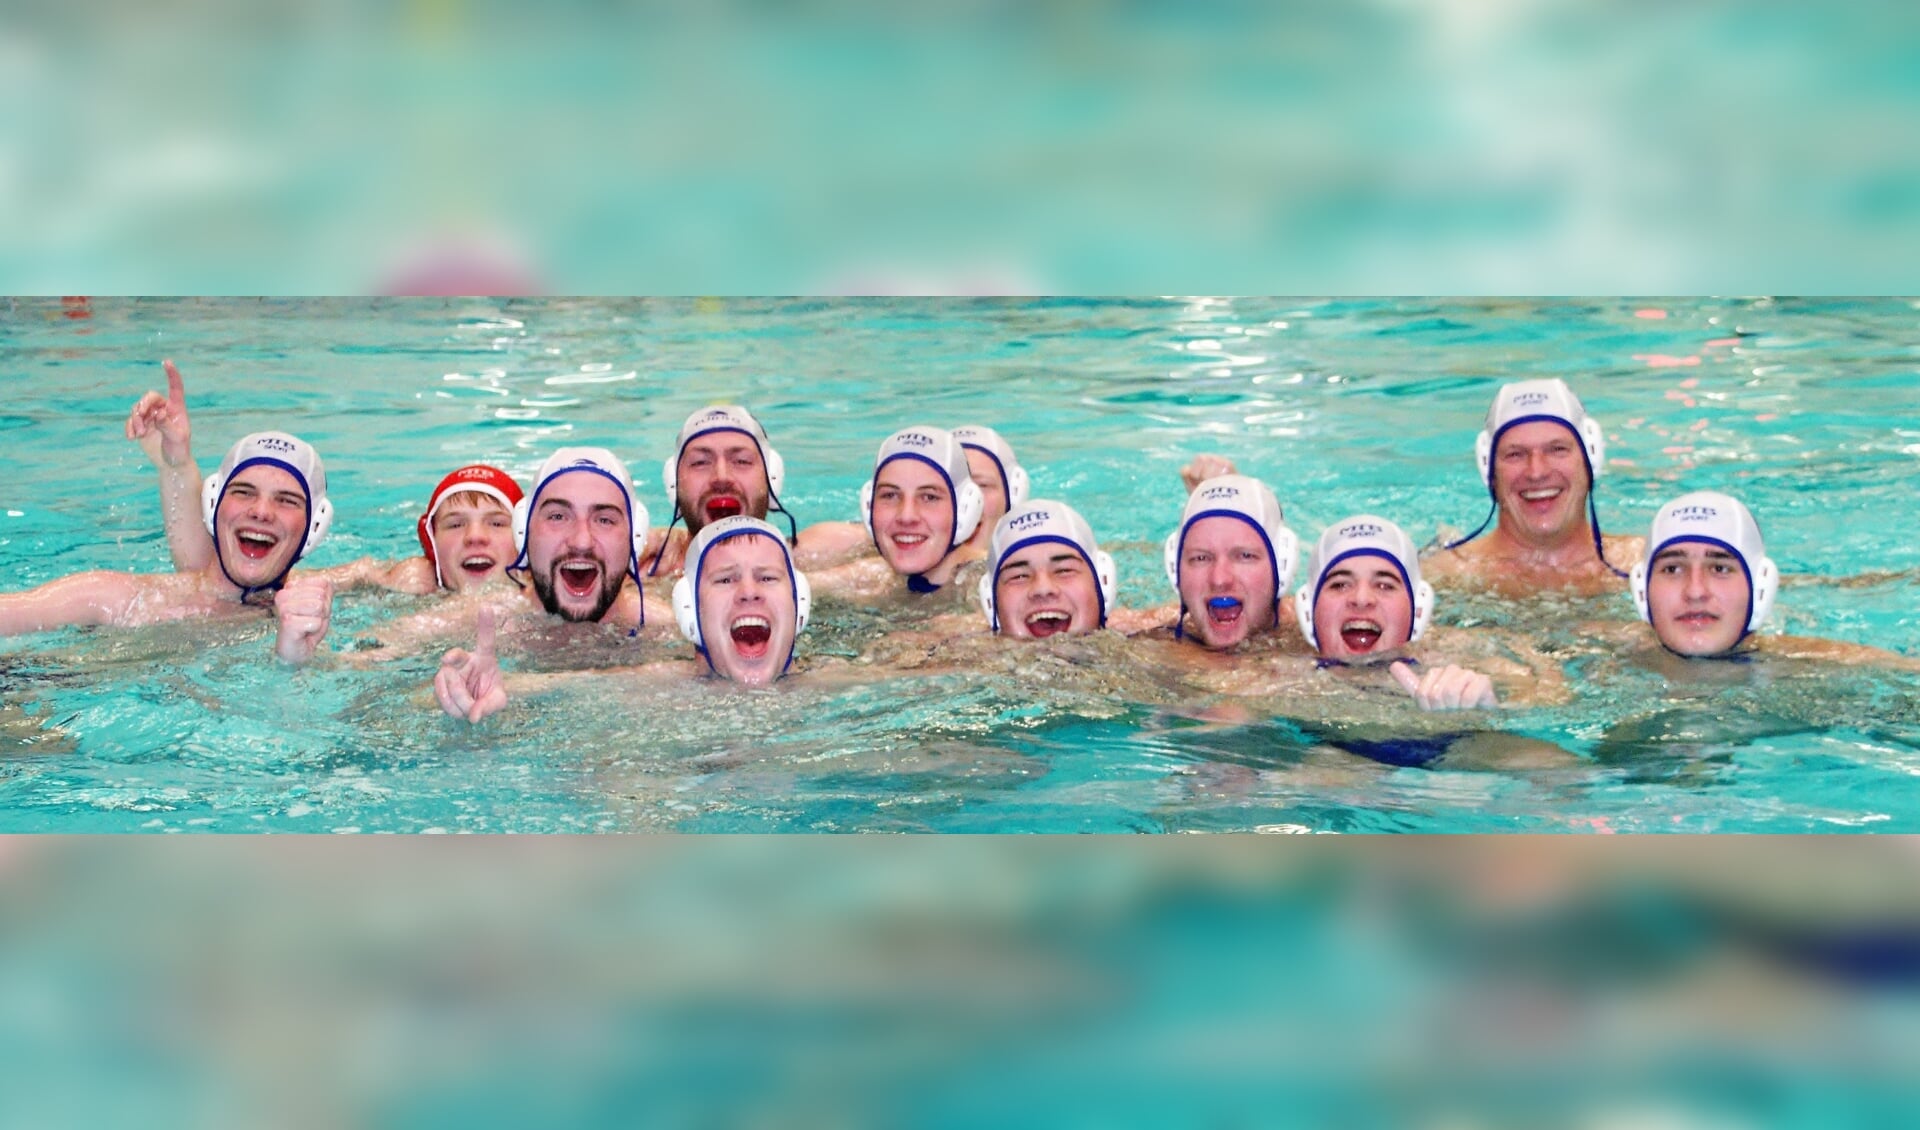 H1 waterpolo team Hieronymus.